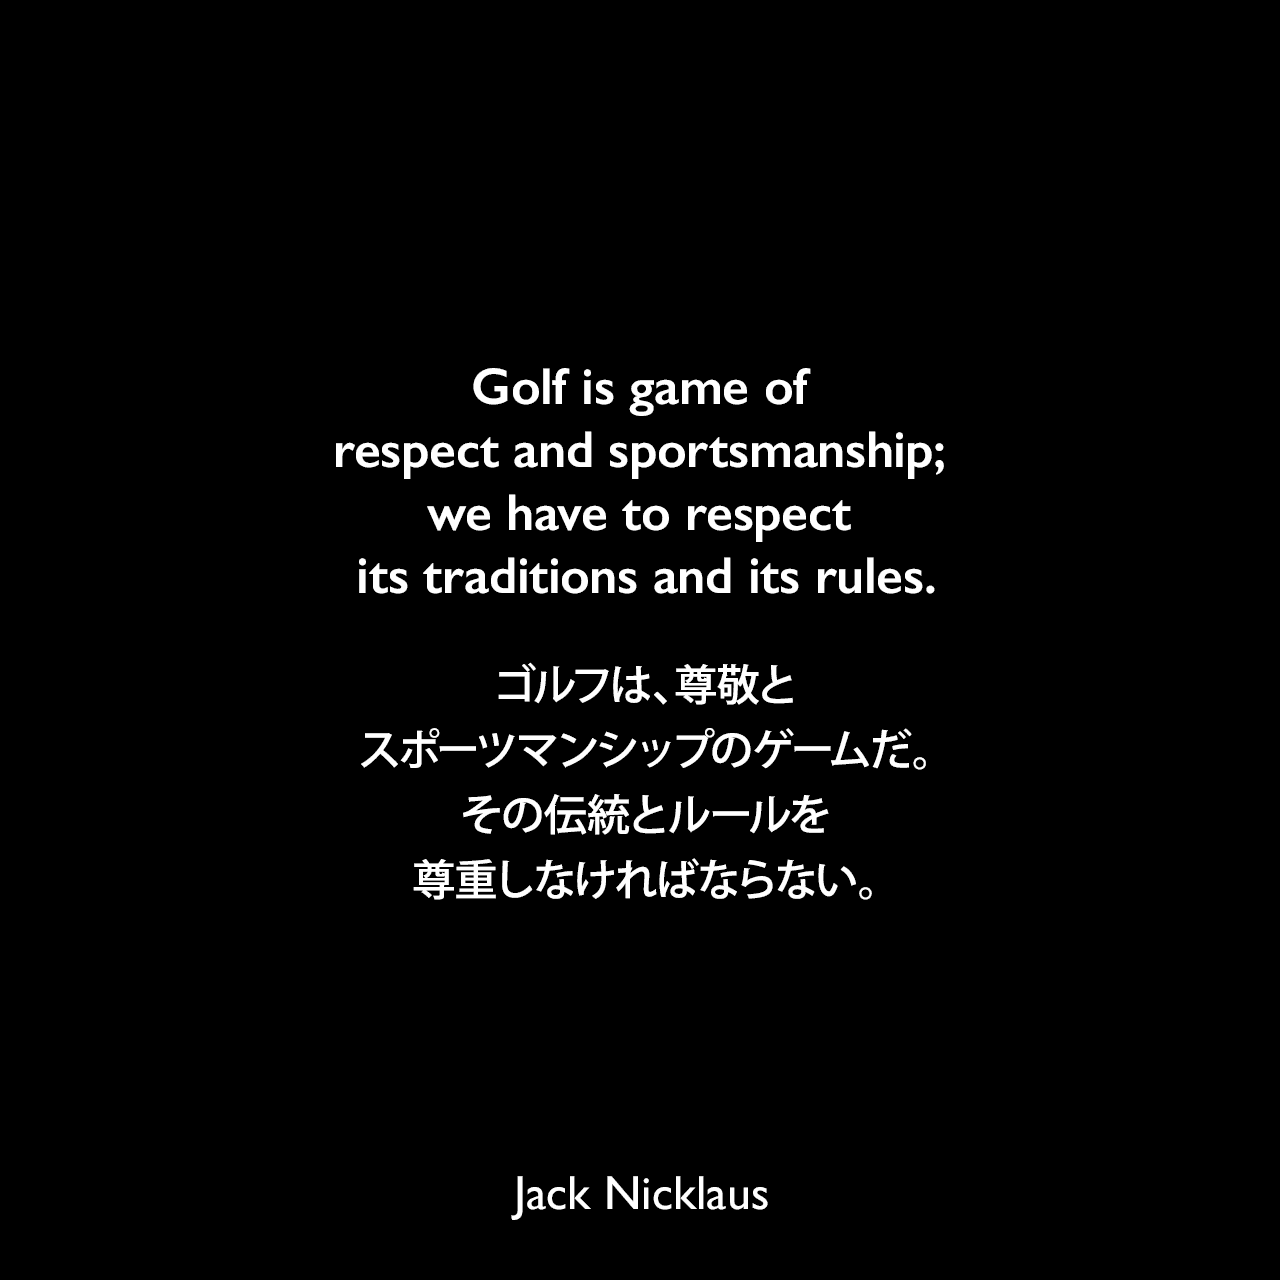 Golf is game of respect and sportsmanship; we have to respect its traditions and its rules.ゴルフは、尊敬とスポーツマンシップのゲームだ。その伝統とルールを尊重しなければならない。Jack Nicklaus